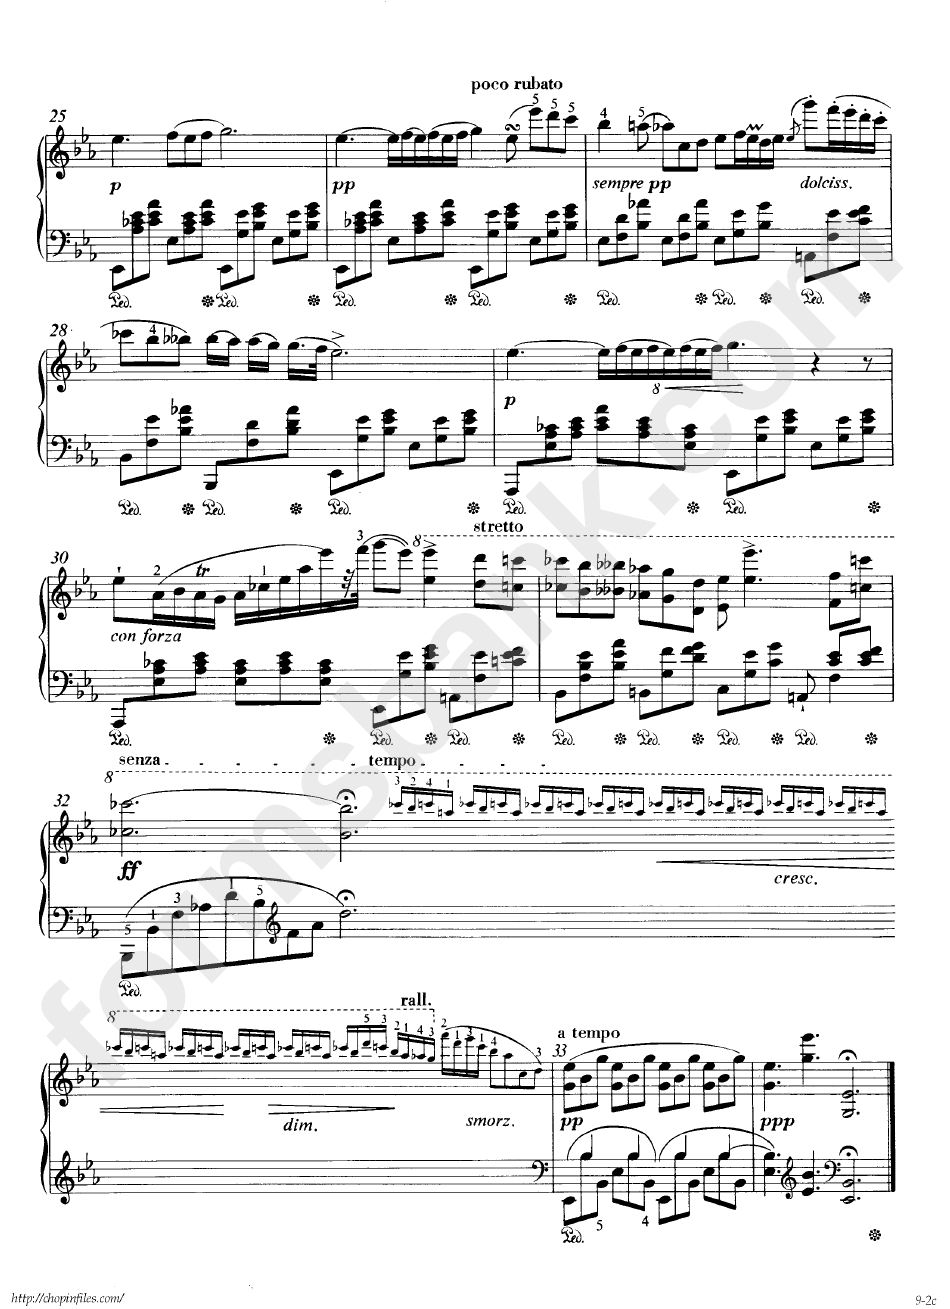 Nocturne Opus 9 No. 2 - Frederic Chopin